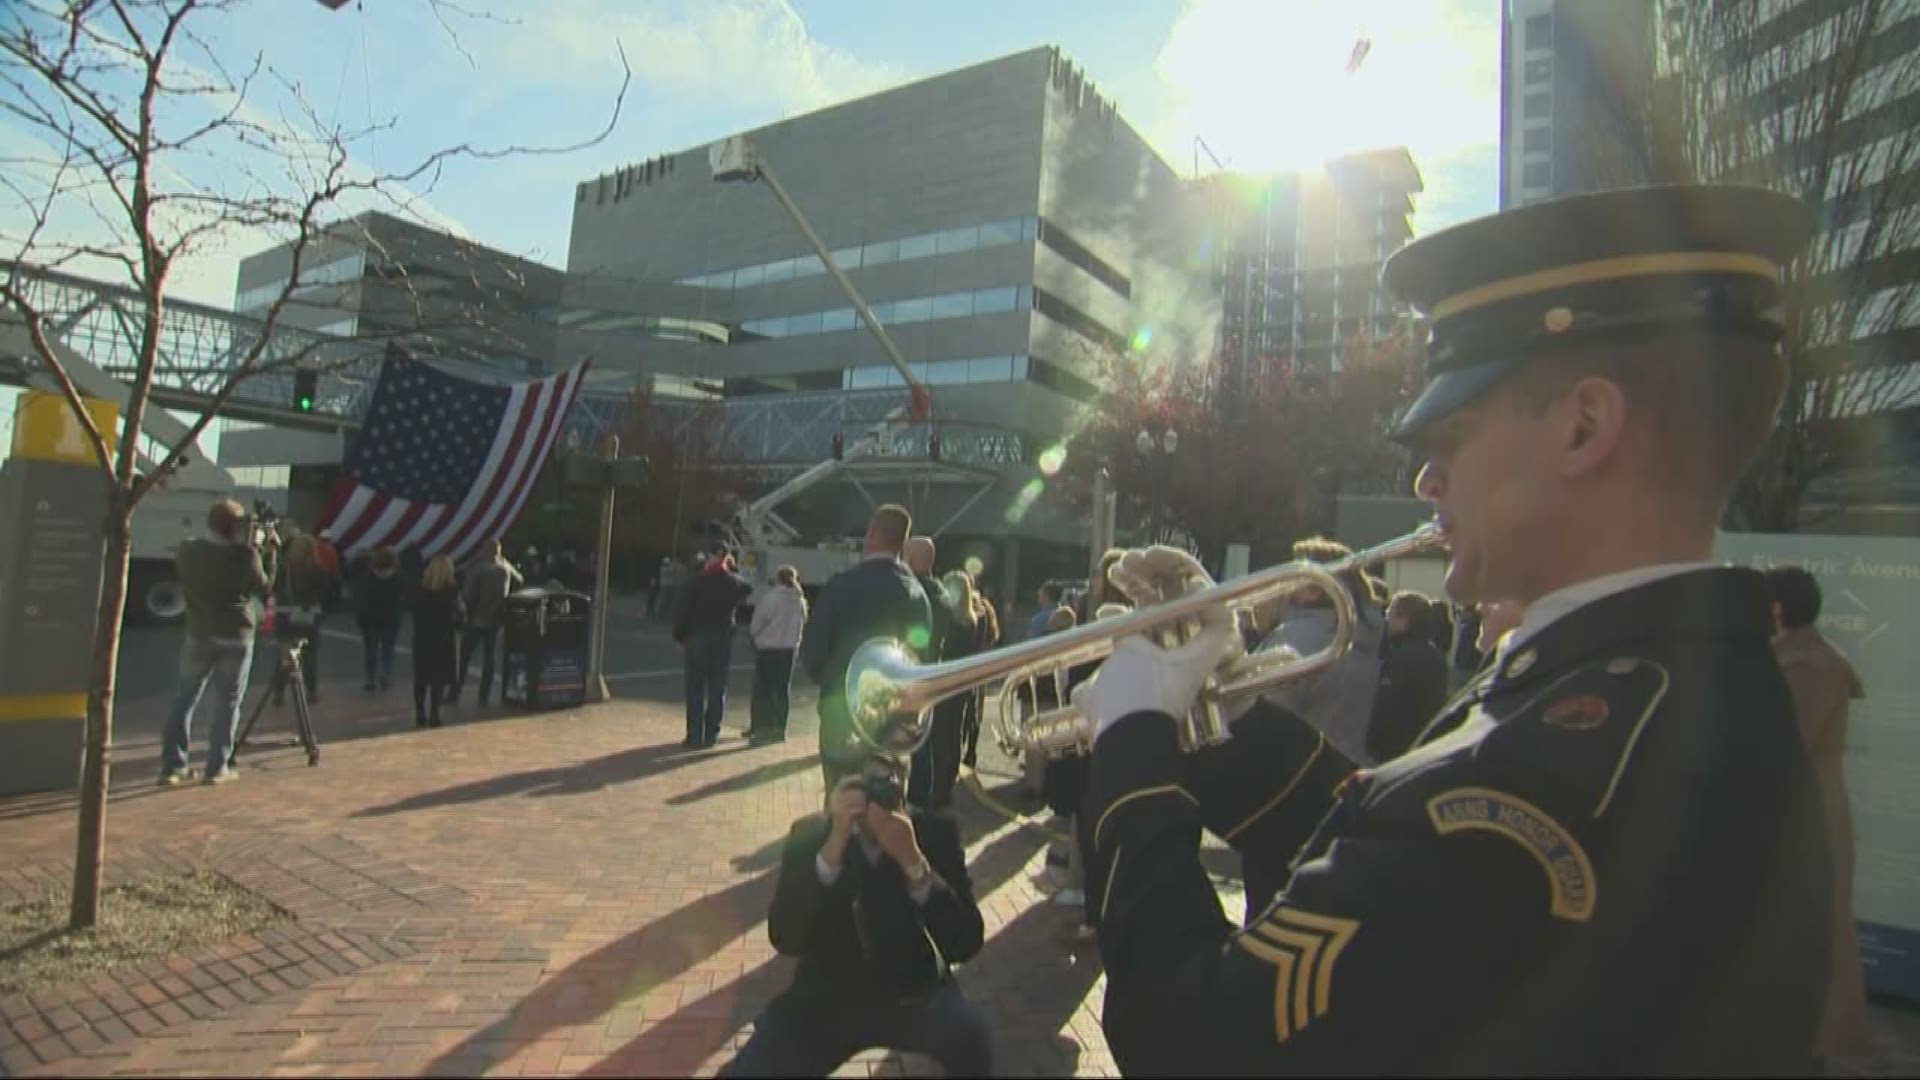 How many honored veterans in the Portland area.